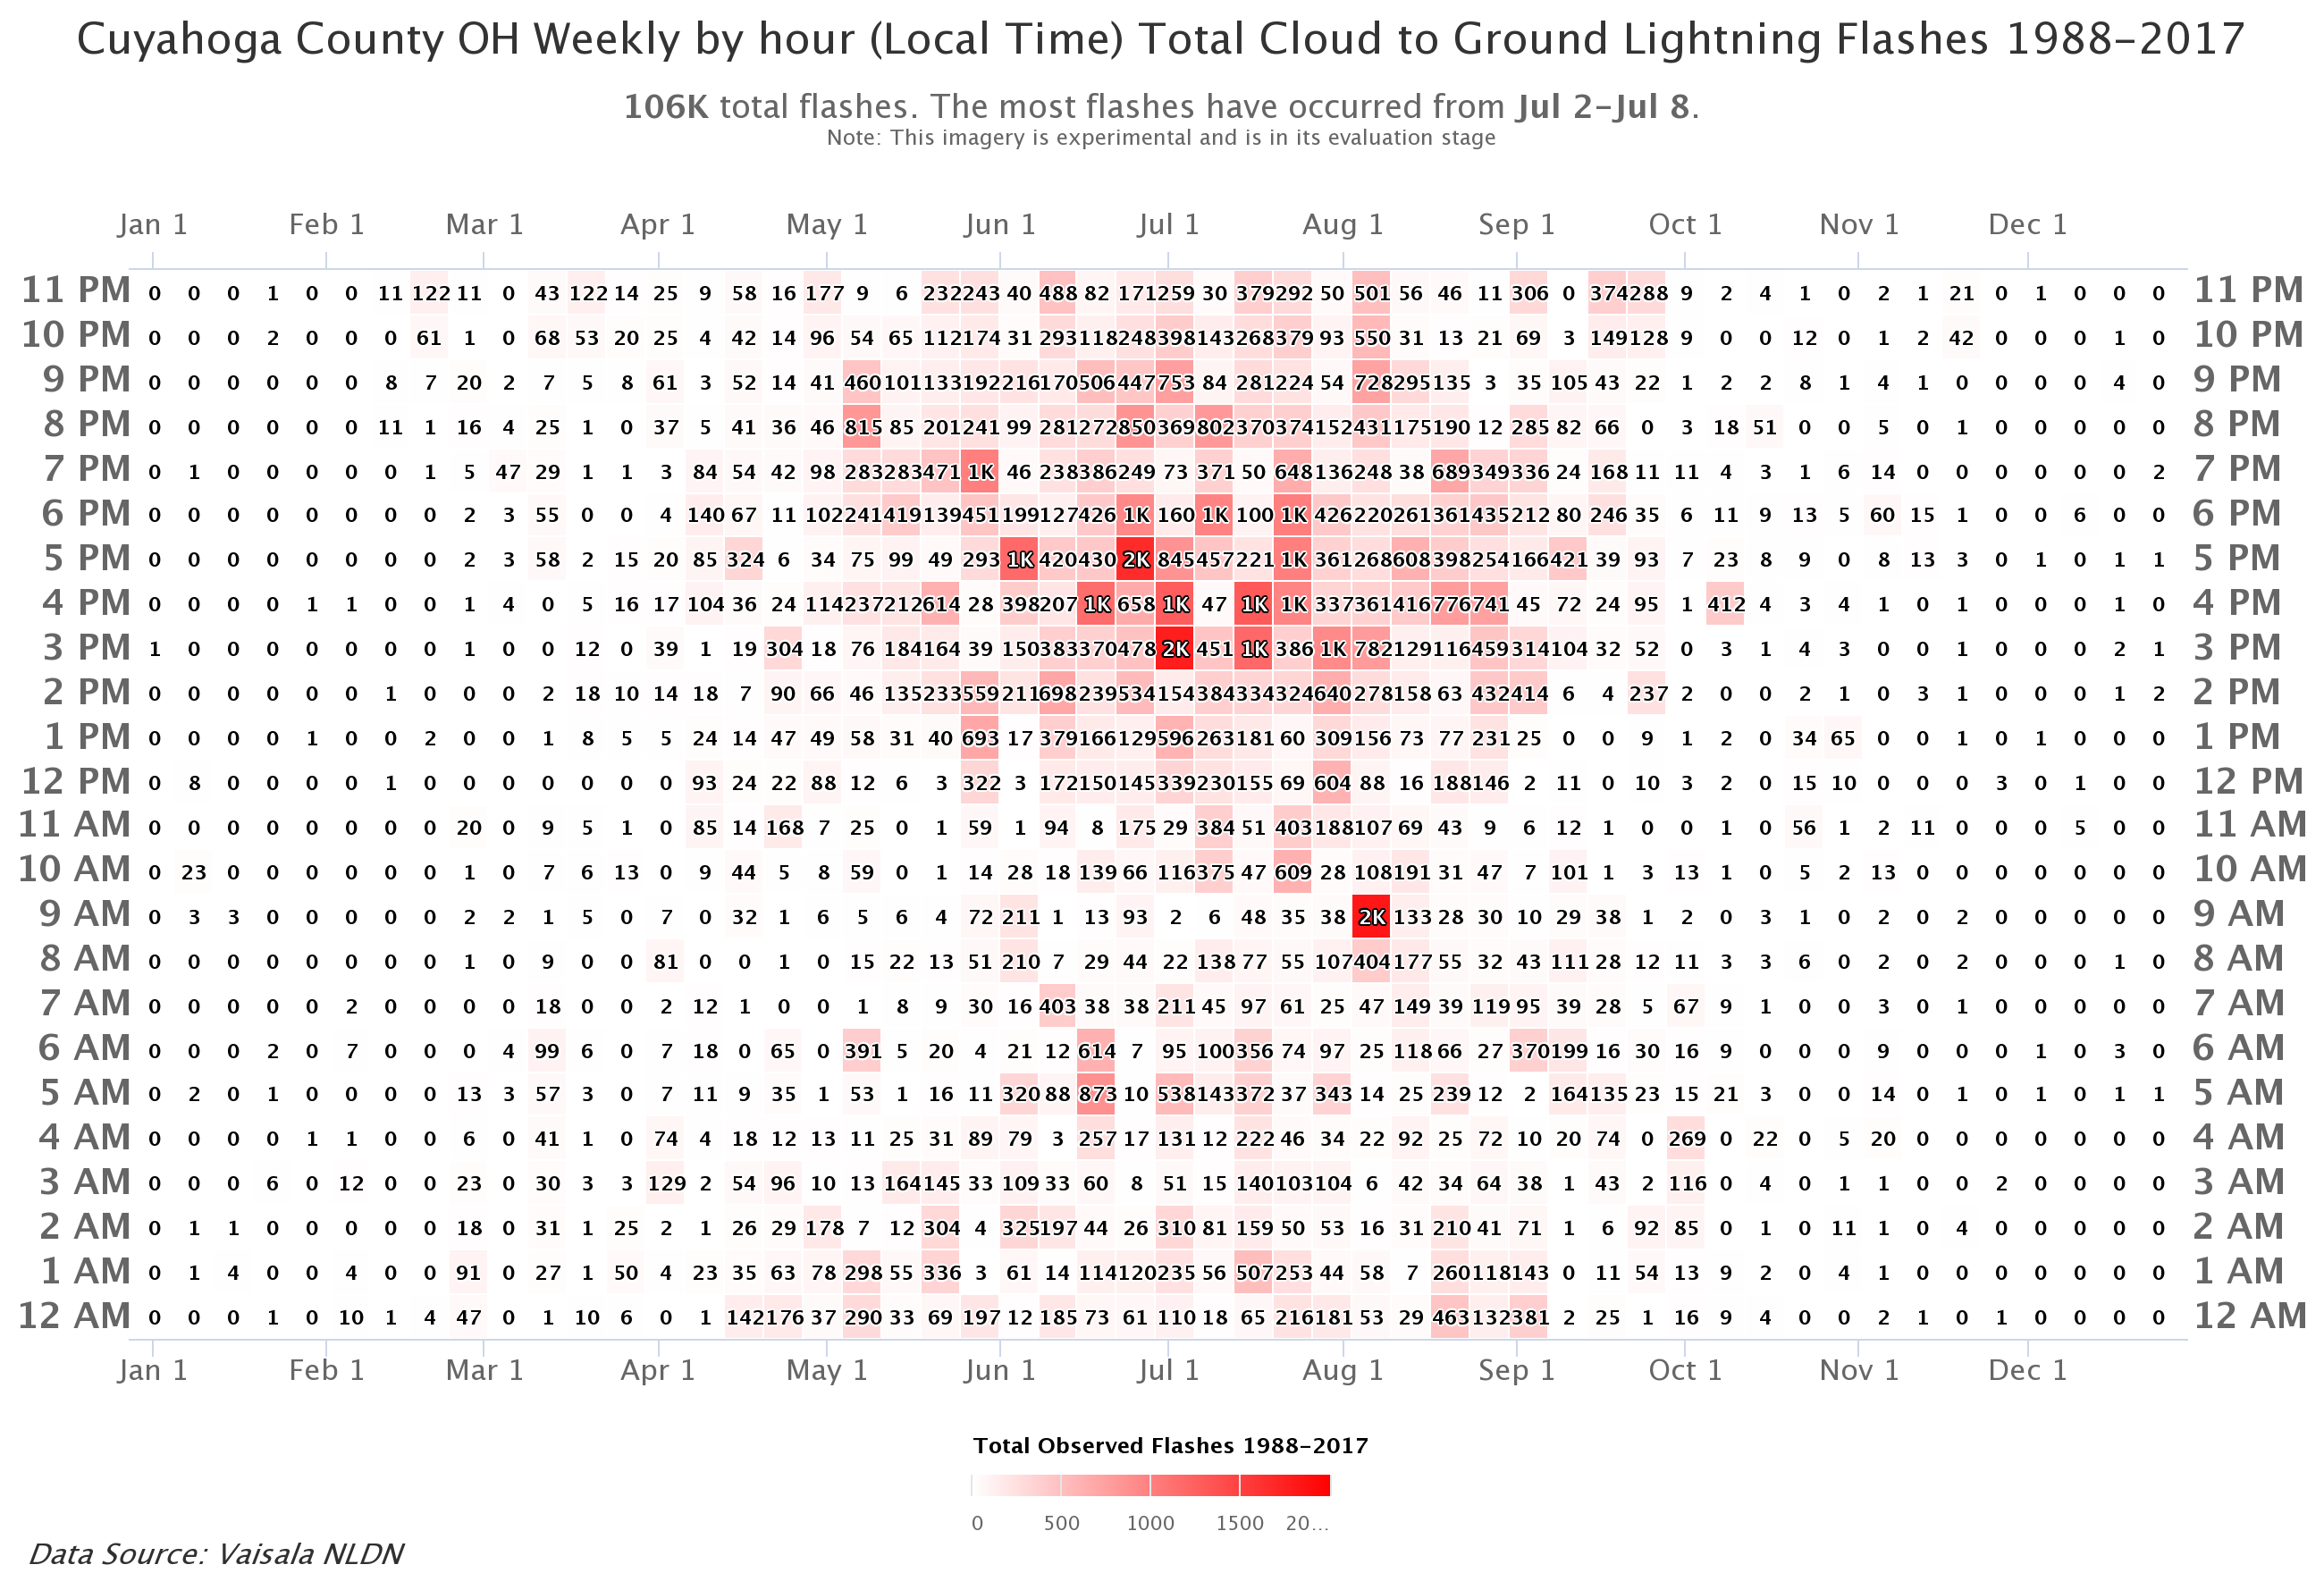 Cuyahoga County Weekly by hour Total Flashes - Lightning Climatology